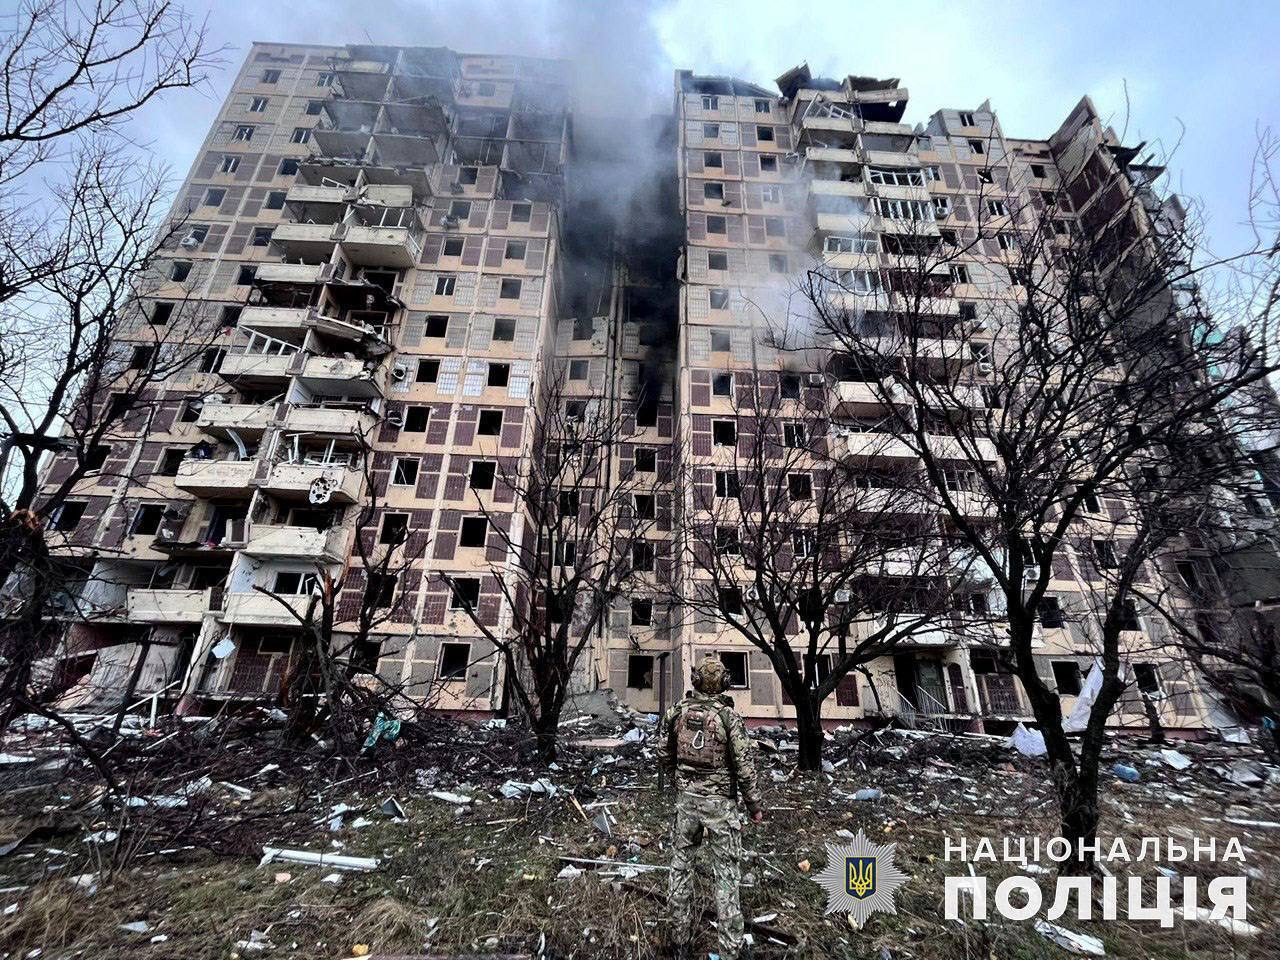 Hostile S-300 missile hits a high-rise building in Novohrodivka, Donetsk region: one wounded